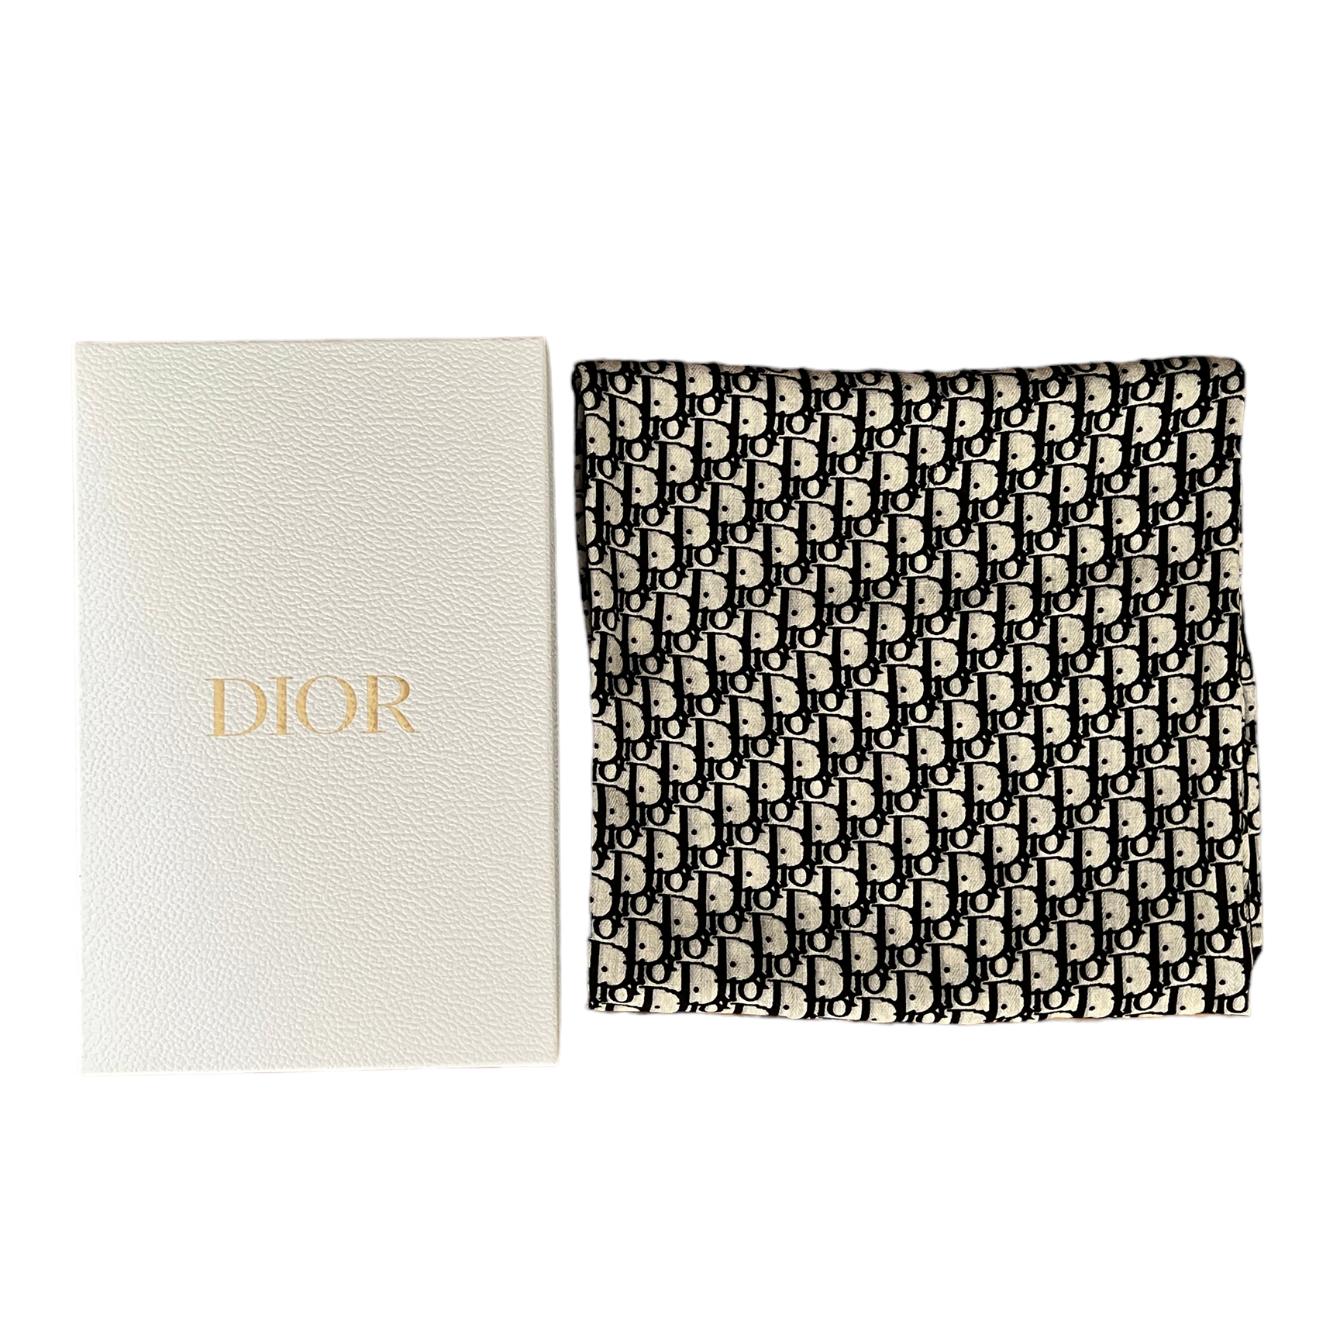 - Featuring Dior logo pattern
- Mix of cashmere and silk
- Comes with the original box
- Made in France 
- Perfect condition